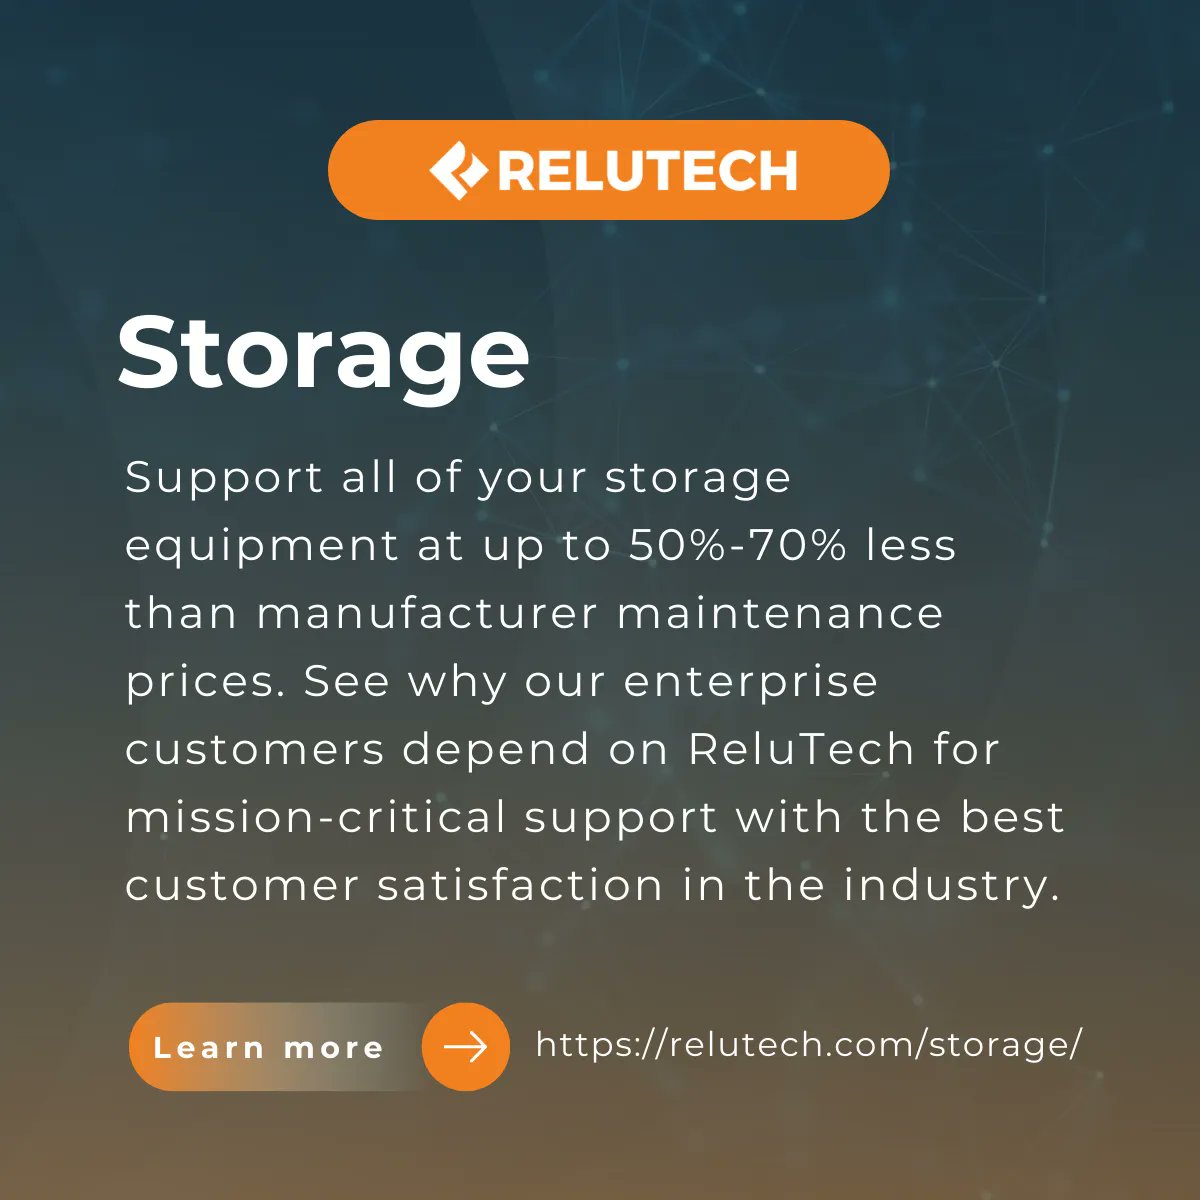 Looking for reliable storage equipment maintenance and support? #Relutech offers unbeatable customer satisfaction at up to 50%-70% less than manufacturer prices. Get premium service and peace of mind on mission-critical storage support. Visit: bit.ly/42E6mK9